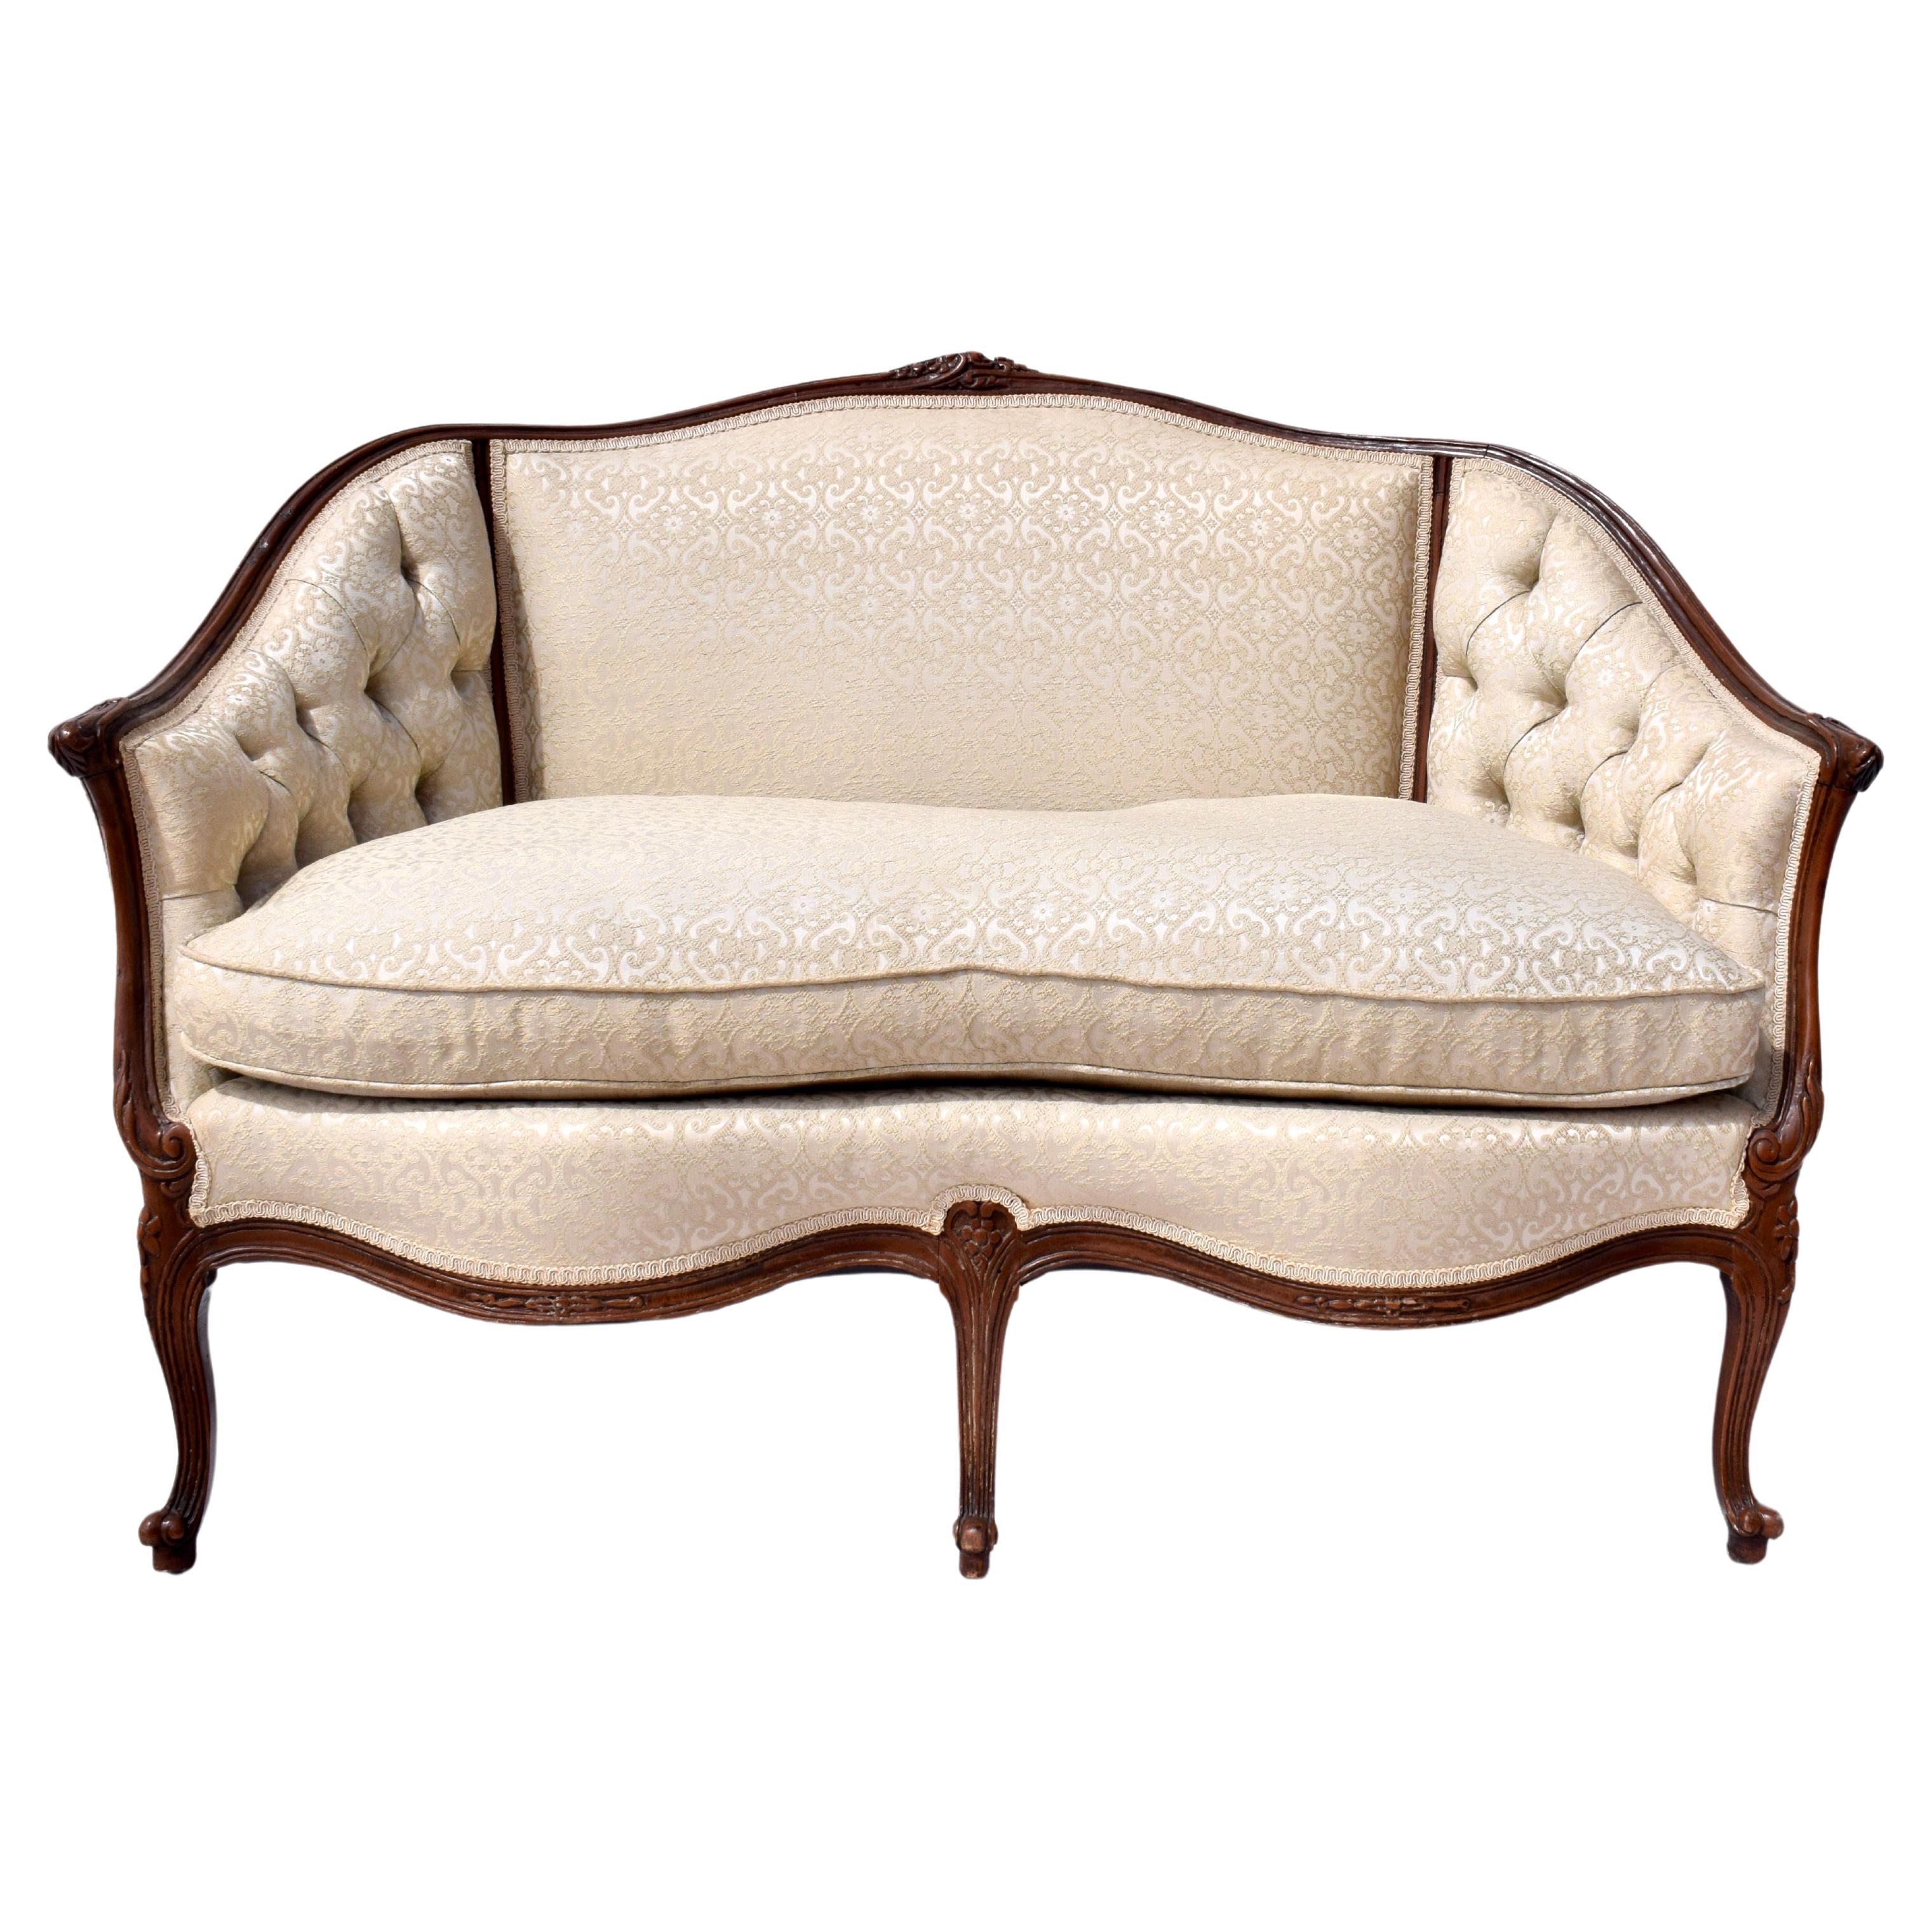 Louis XV Style French Canape Loveseat